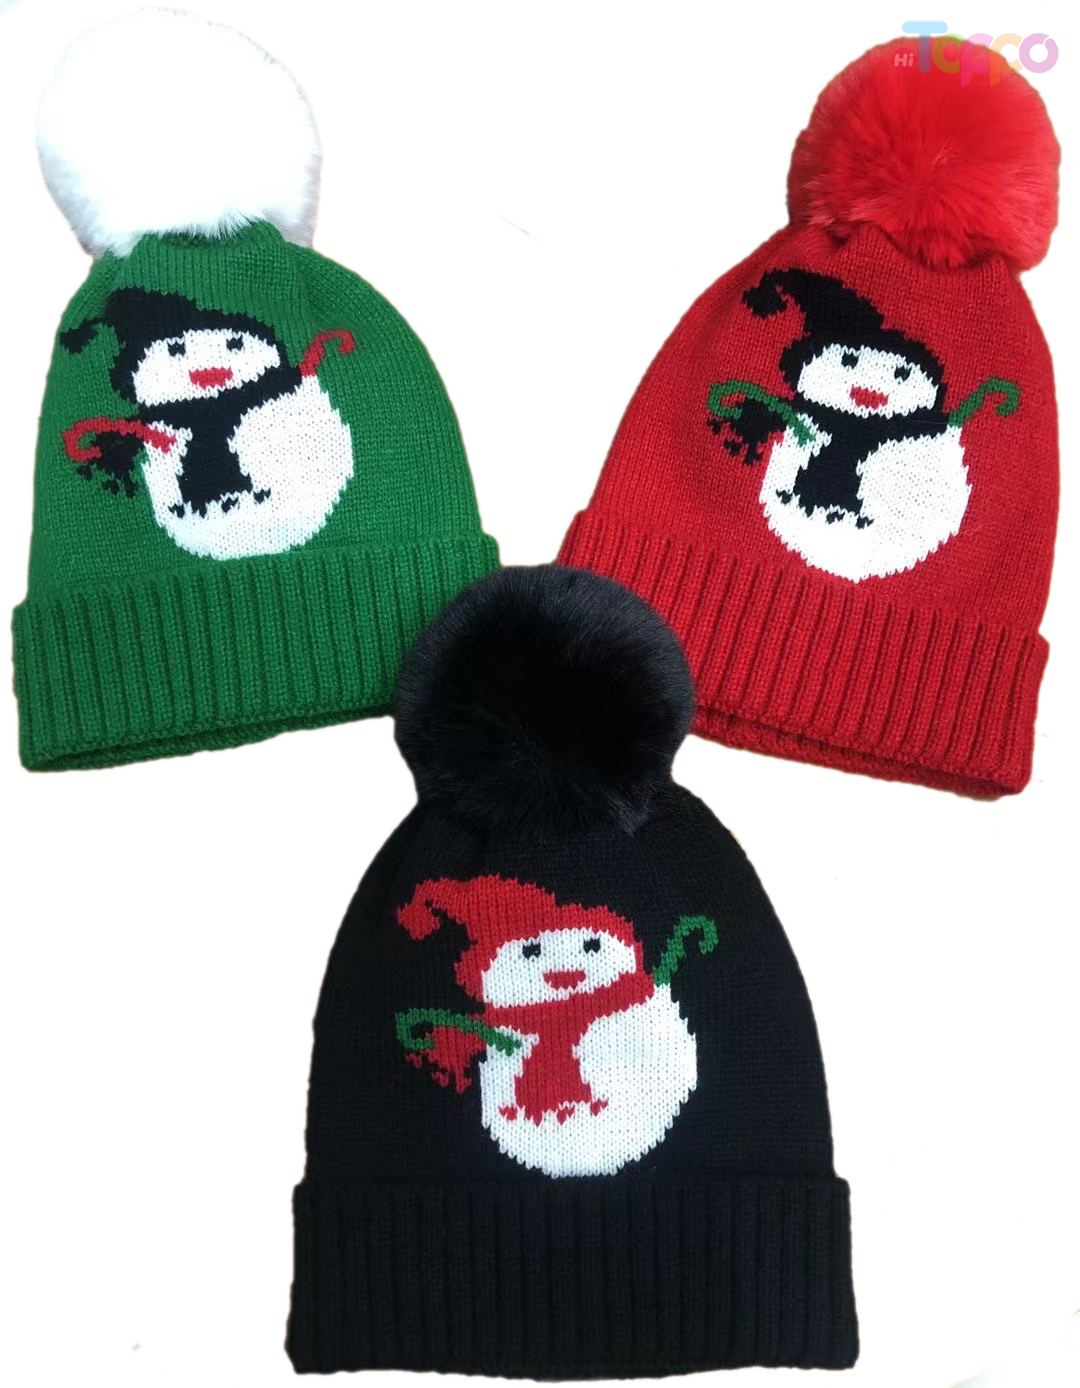 Acrylic Knitted Hats